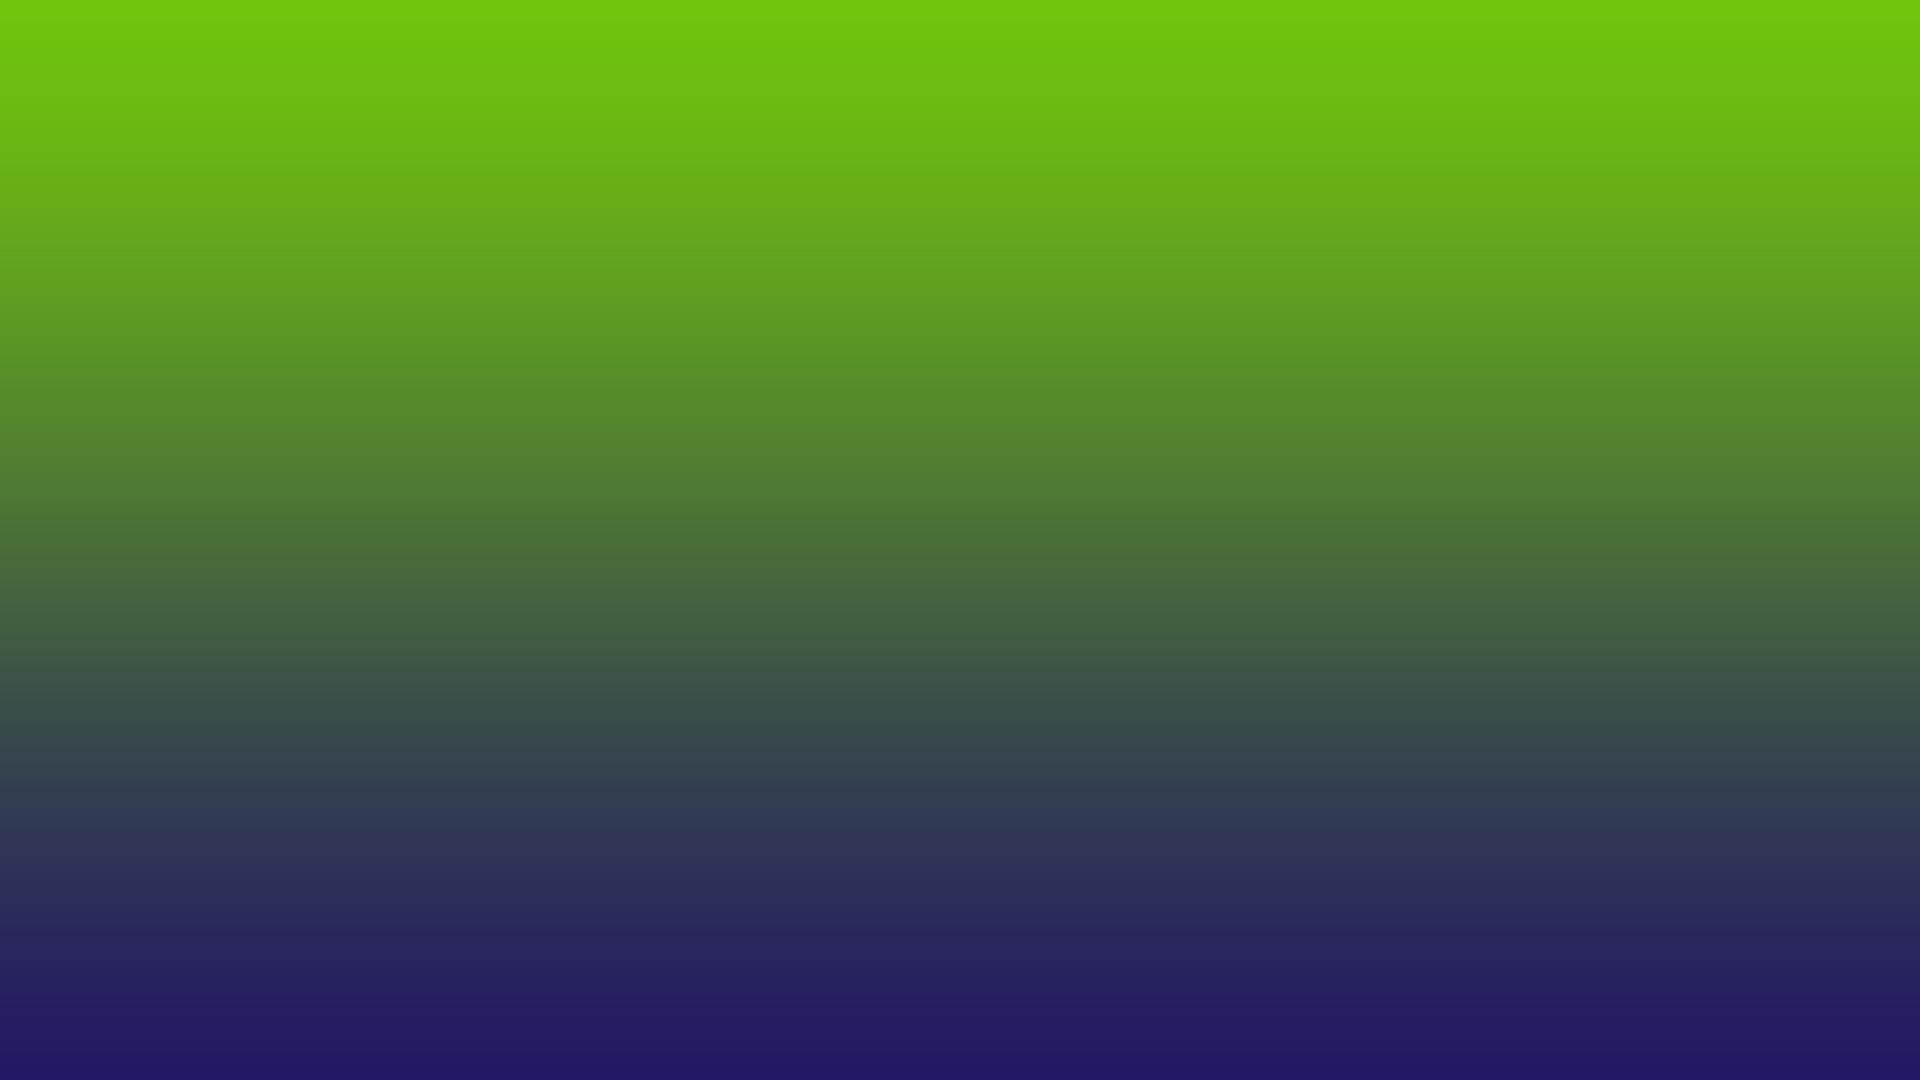 Green and Blue Gradient Wallpaper 63438 1920x1080px